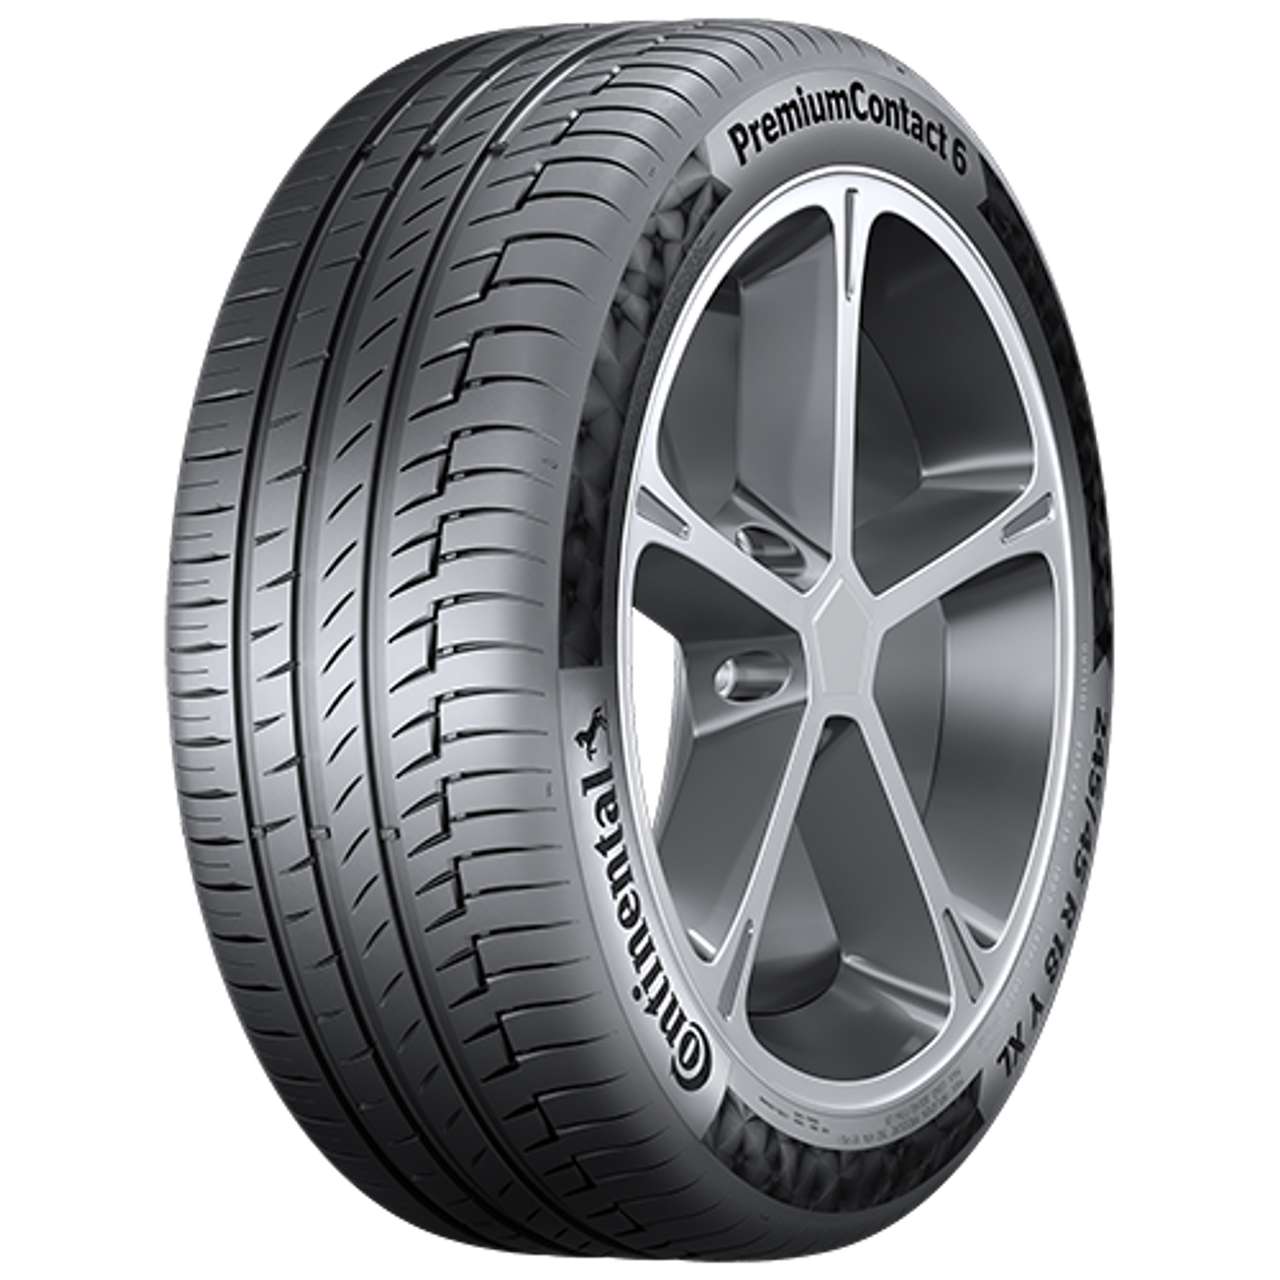 CONTINENTAL PREMIUMCONTACT 6 (*) (EVc) 315/30R22 107Y BSW XL